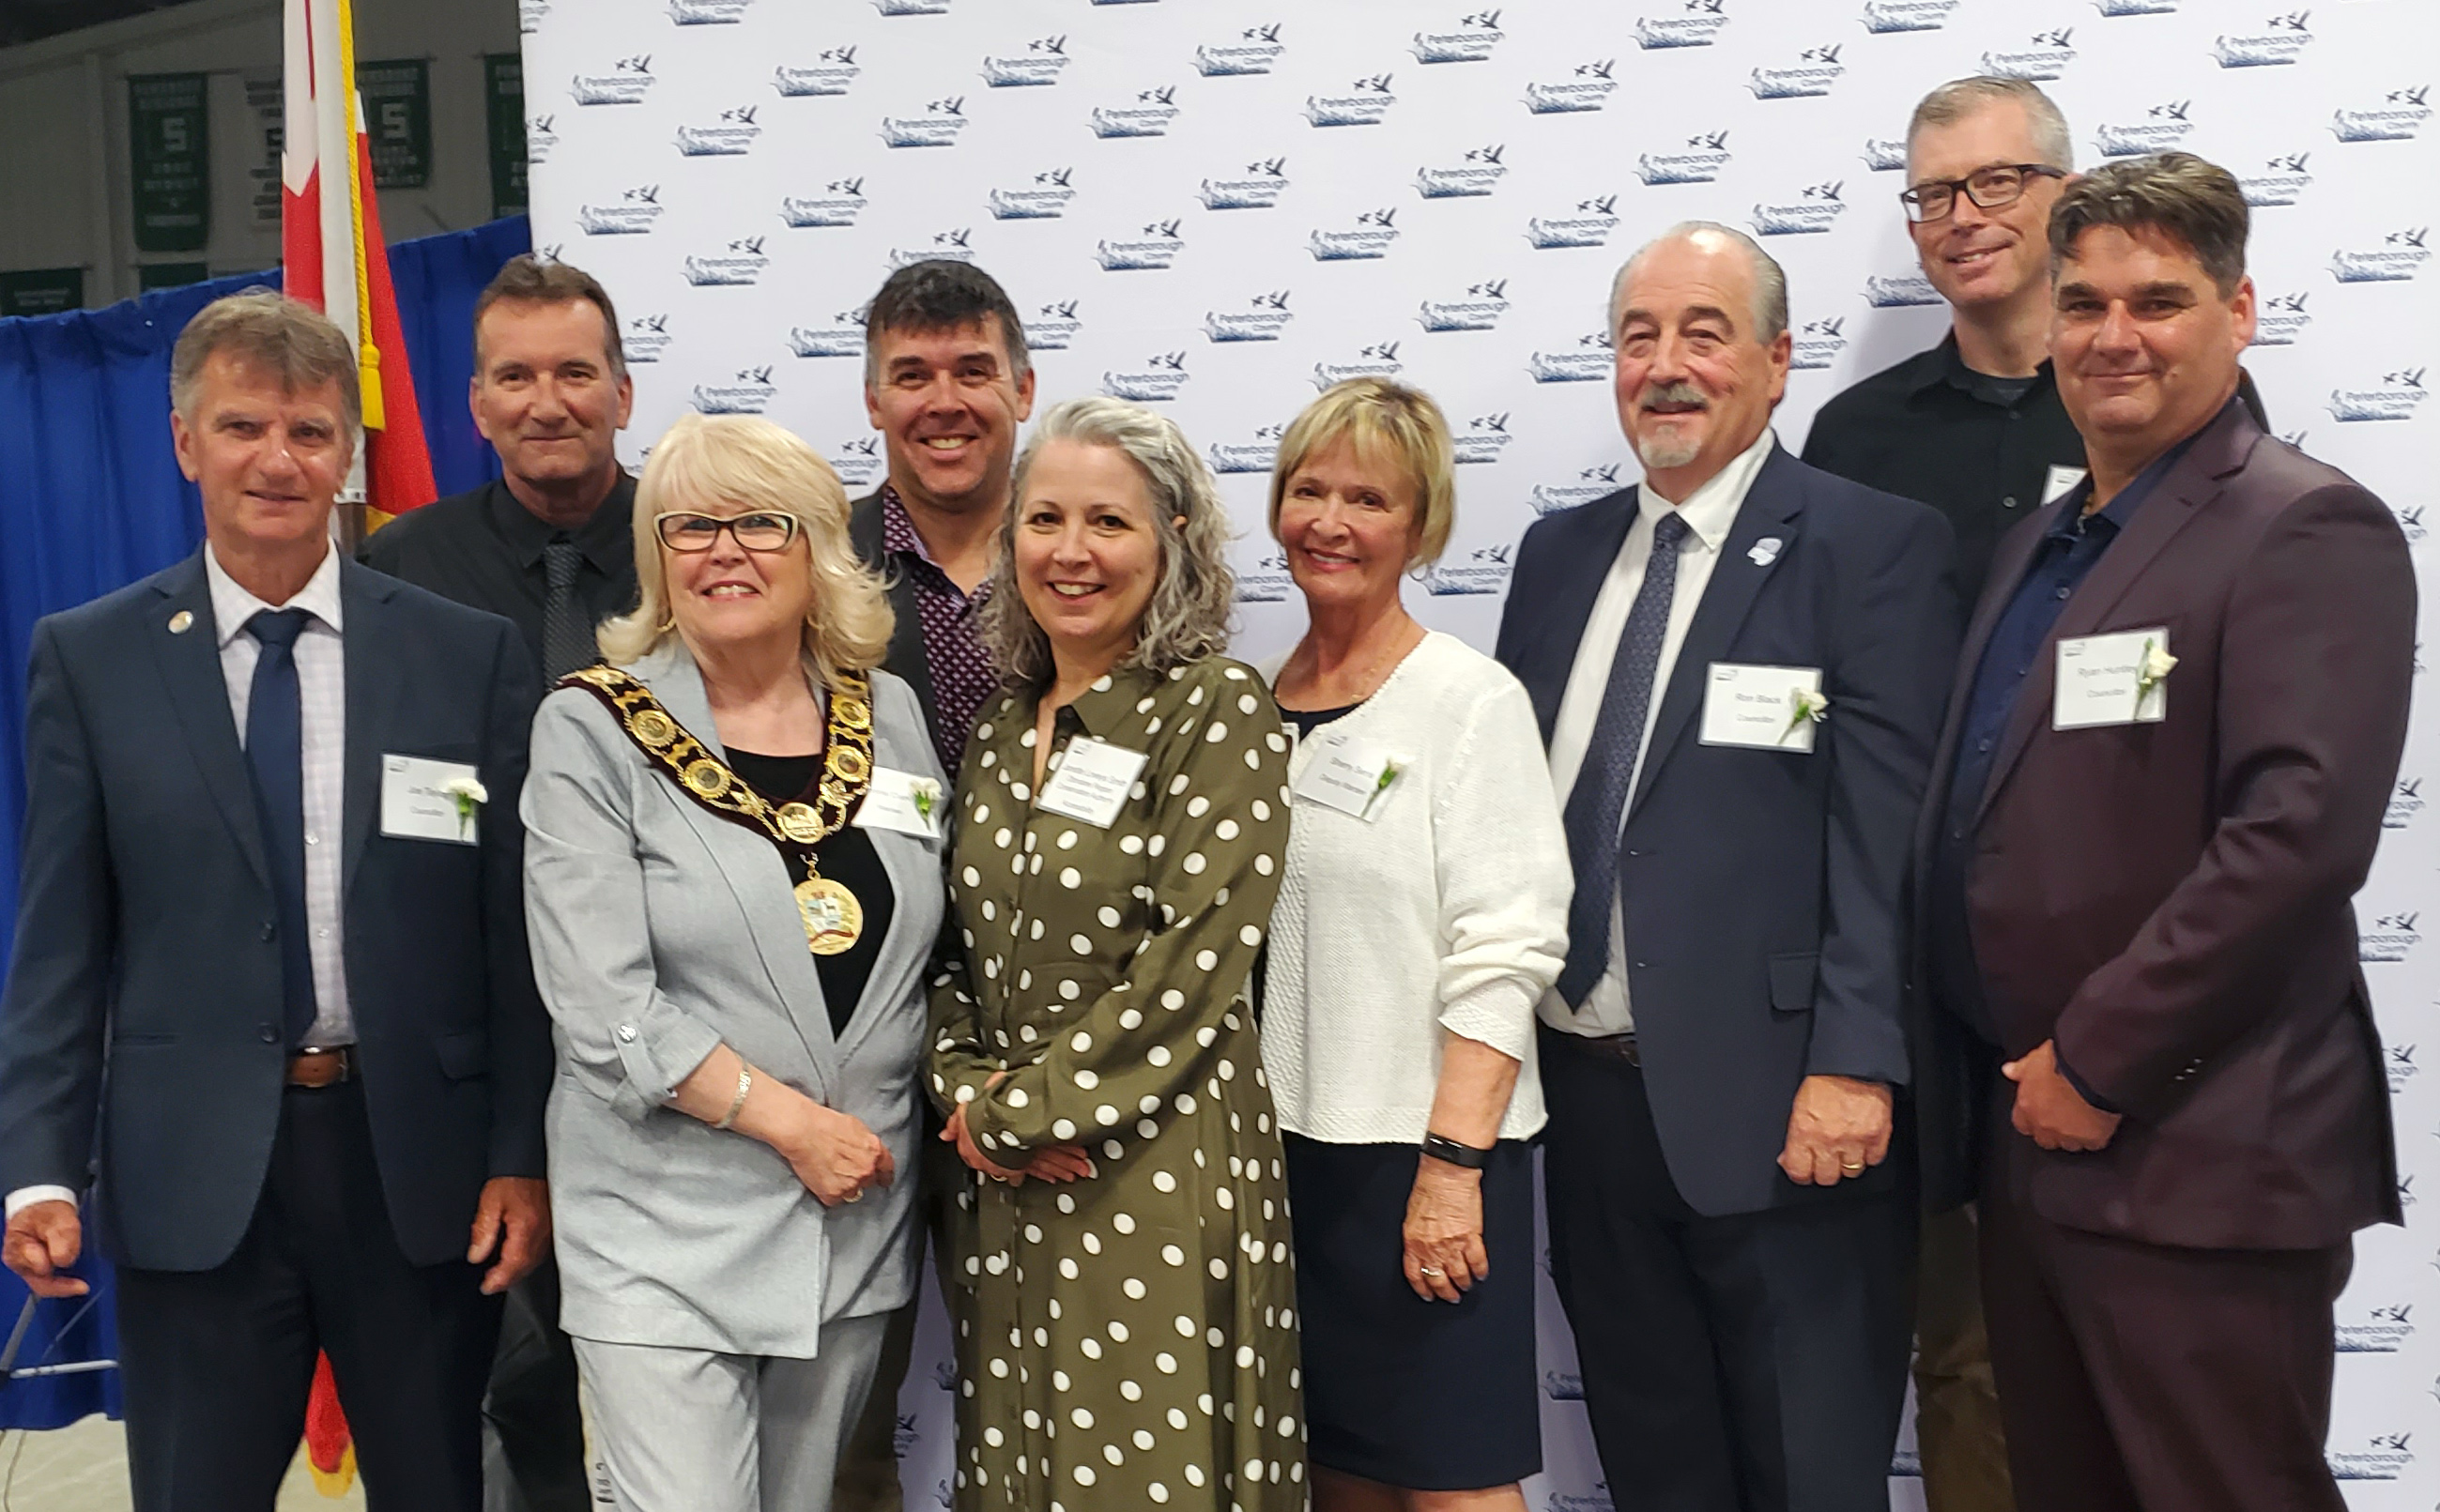 Board Members and Staff from Otonabee Conservation celebrate their Accessibility Recognition Award with the County of Peterborough Warden at the Peterborough County Community Recognition Awards on May 16th.